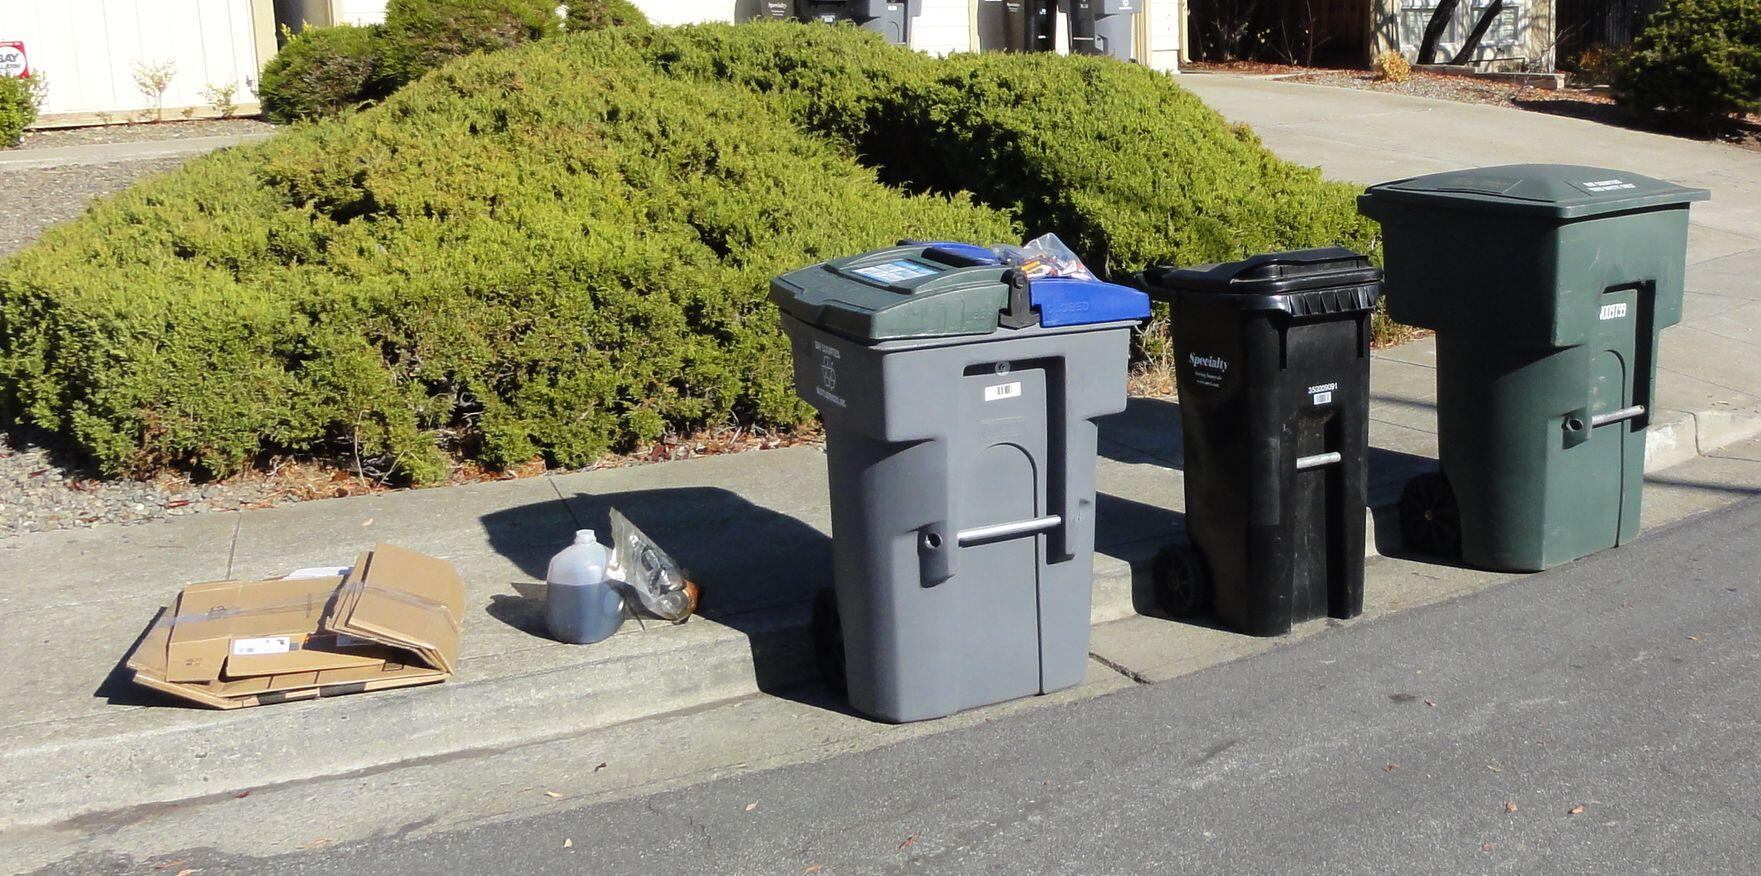 4th of July Normal Garbage Collection Schedule (City of Sunnyvale